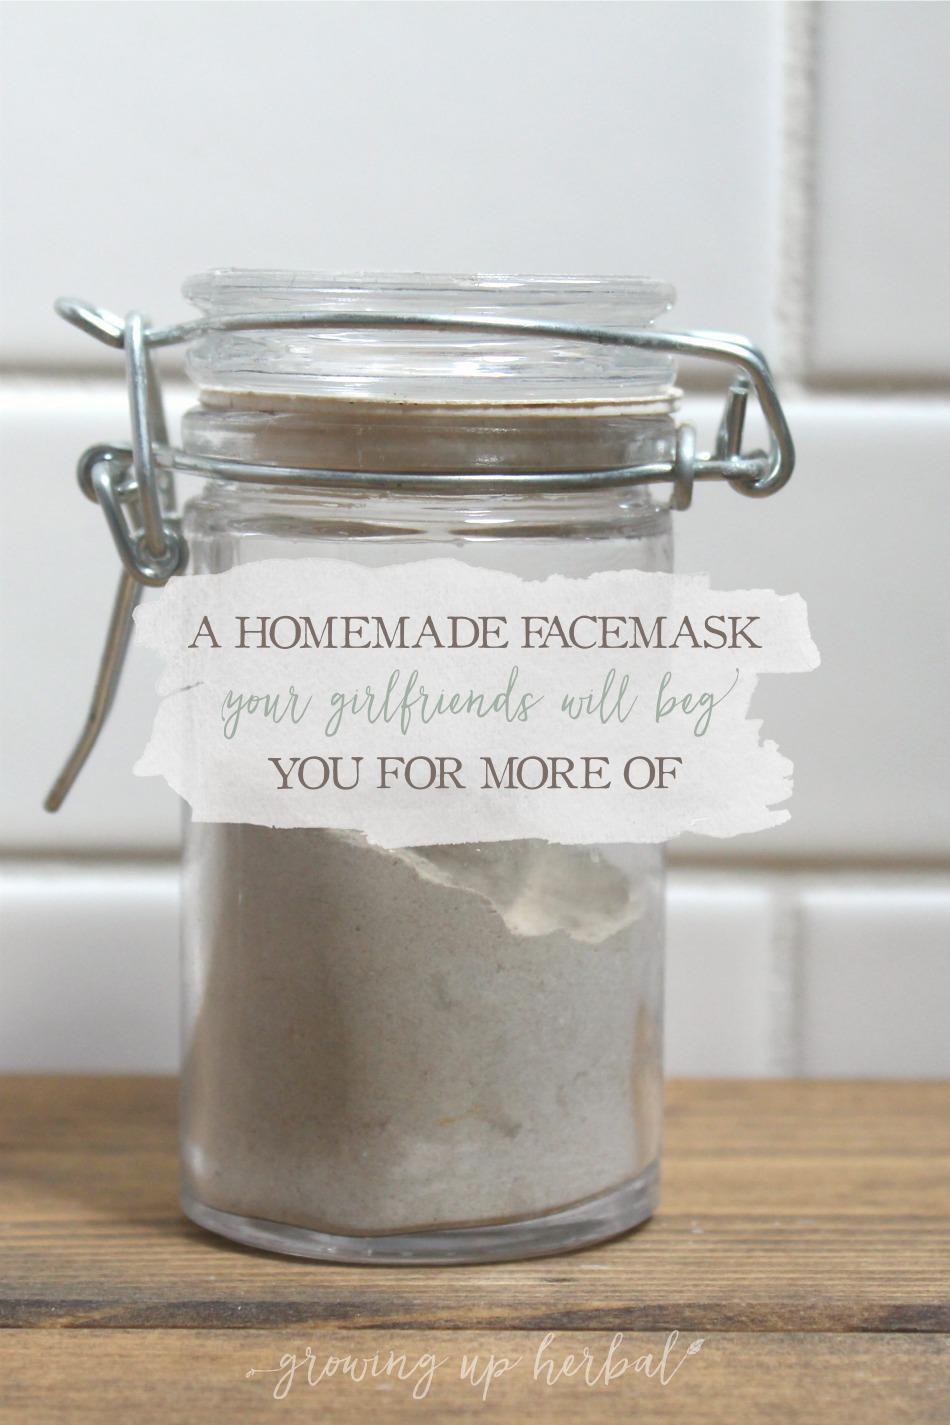 A Homemade Face Mask Your Girlfriends Will Beg Your For More Of | Growing Up Herbal | A DIY holiday face mask your girlfriends will LOVE! Make them some today!